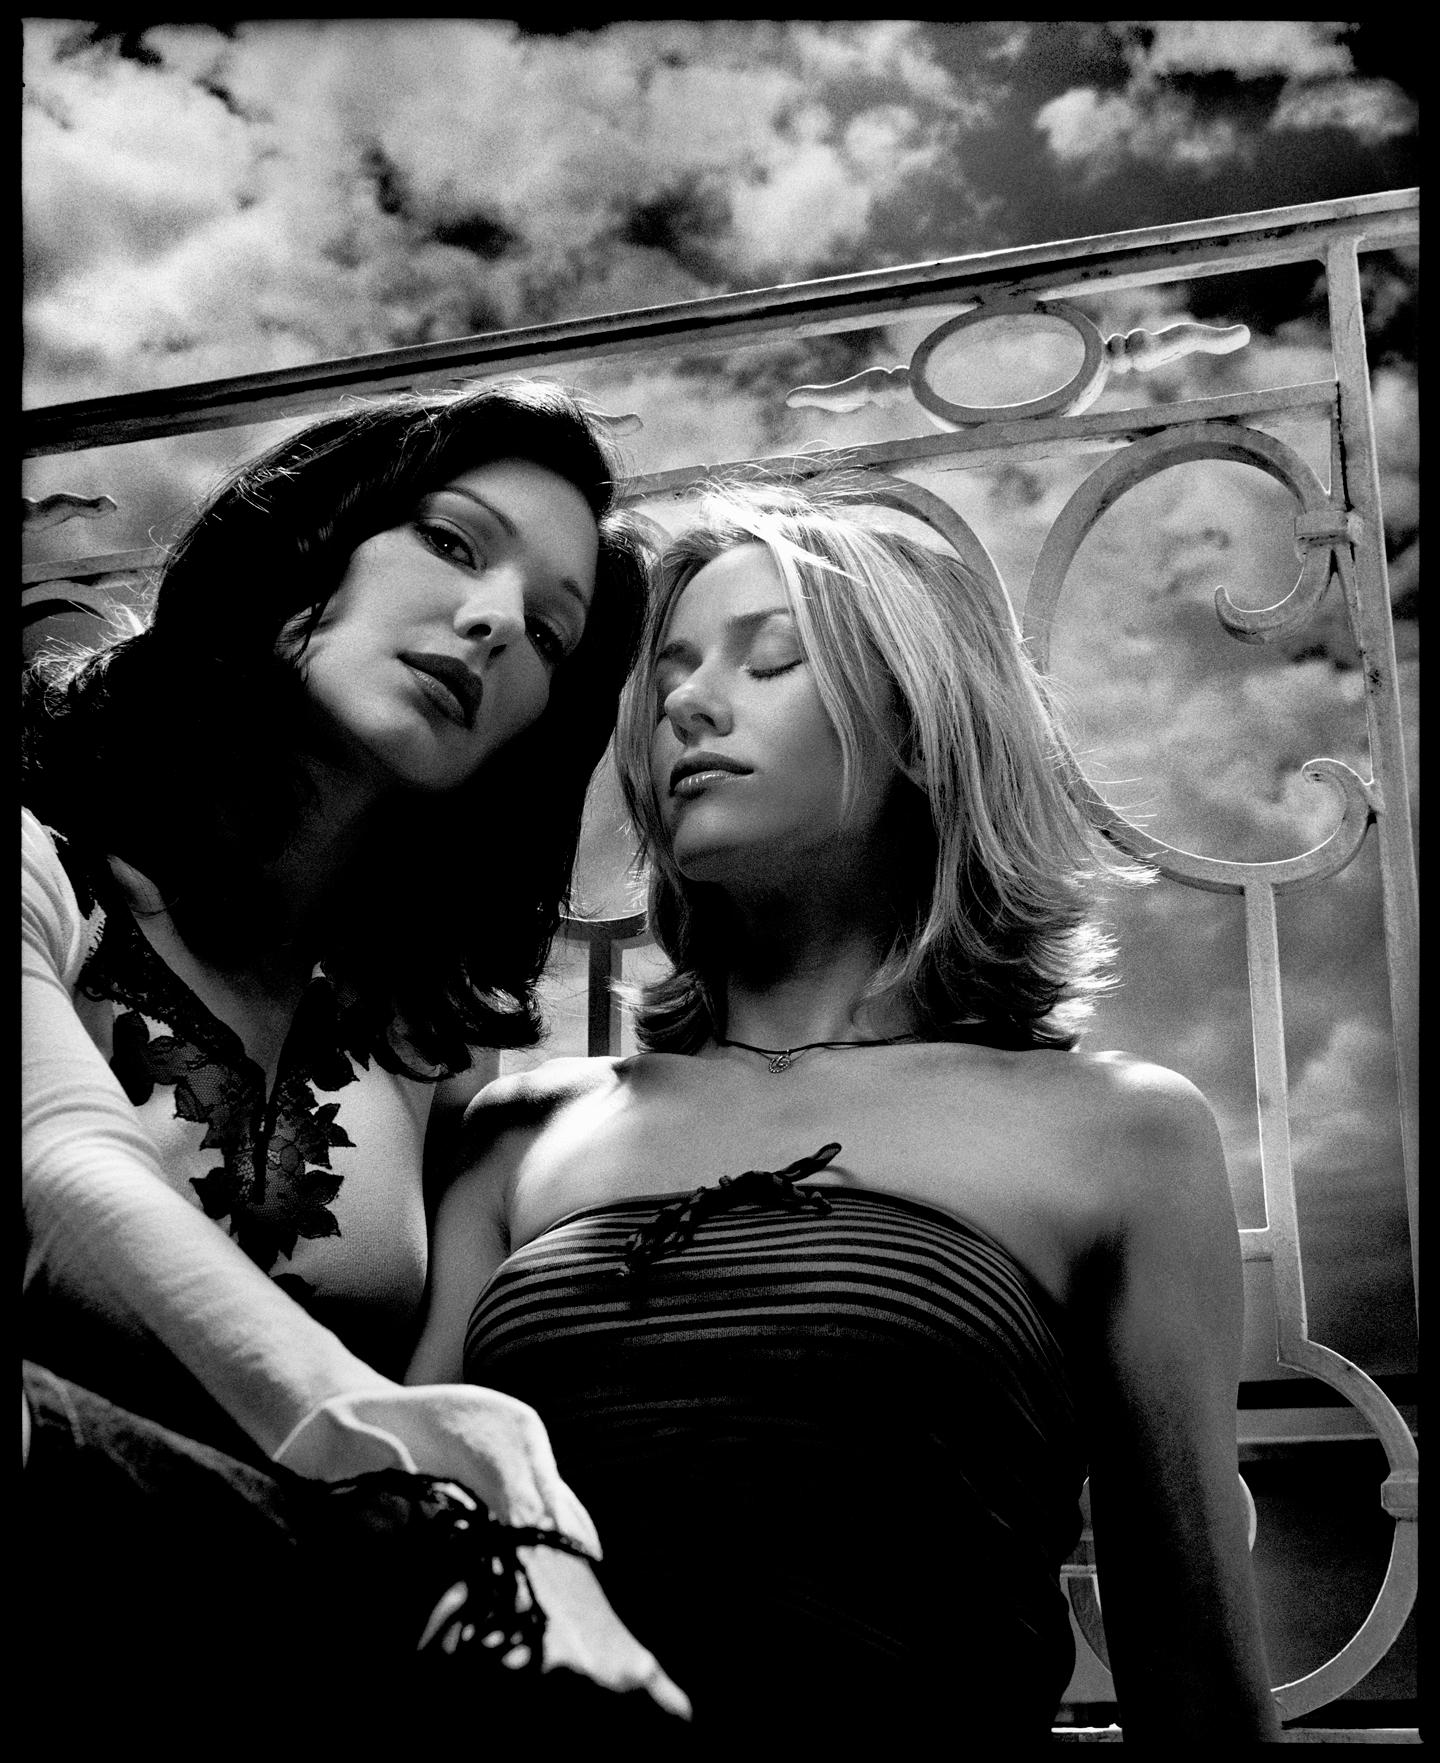 Laura and Naomi 

2022

by Kevin Westenberg
Signed Limited Edition

Kevin Westenberg is famed for his creation of provocative and electrifying images of world-class musicians, artists and movie stars for over 25 years.

His technique of lighting,